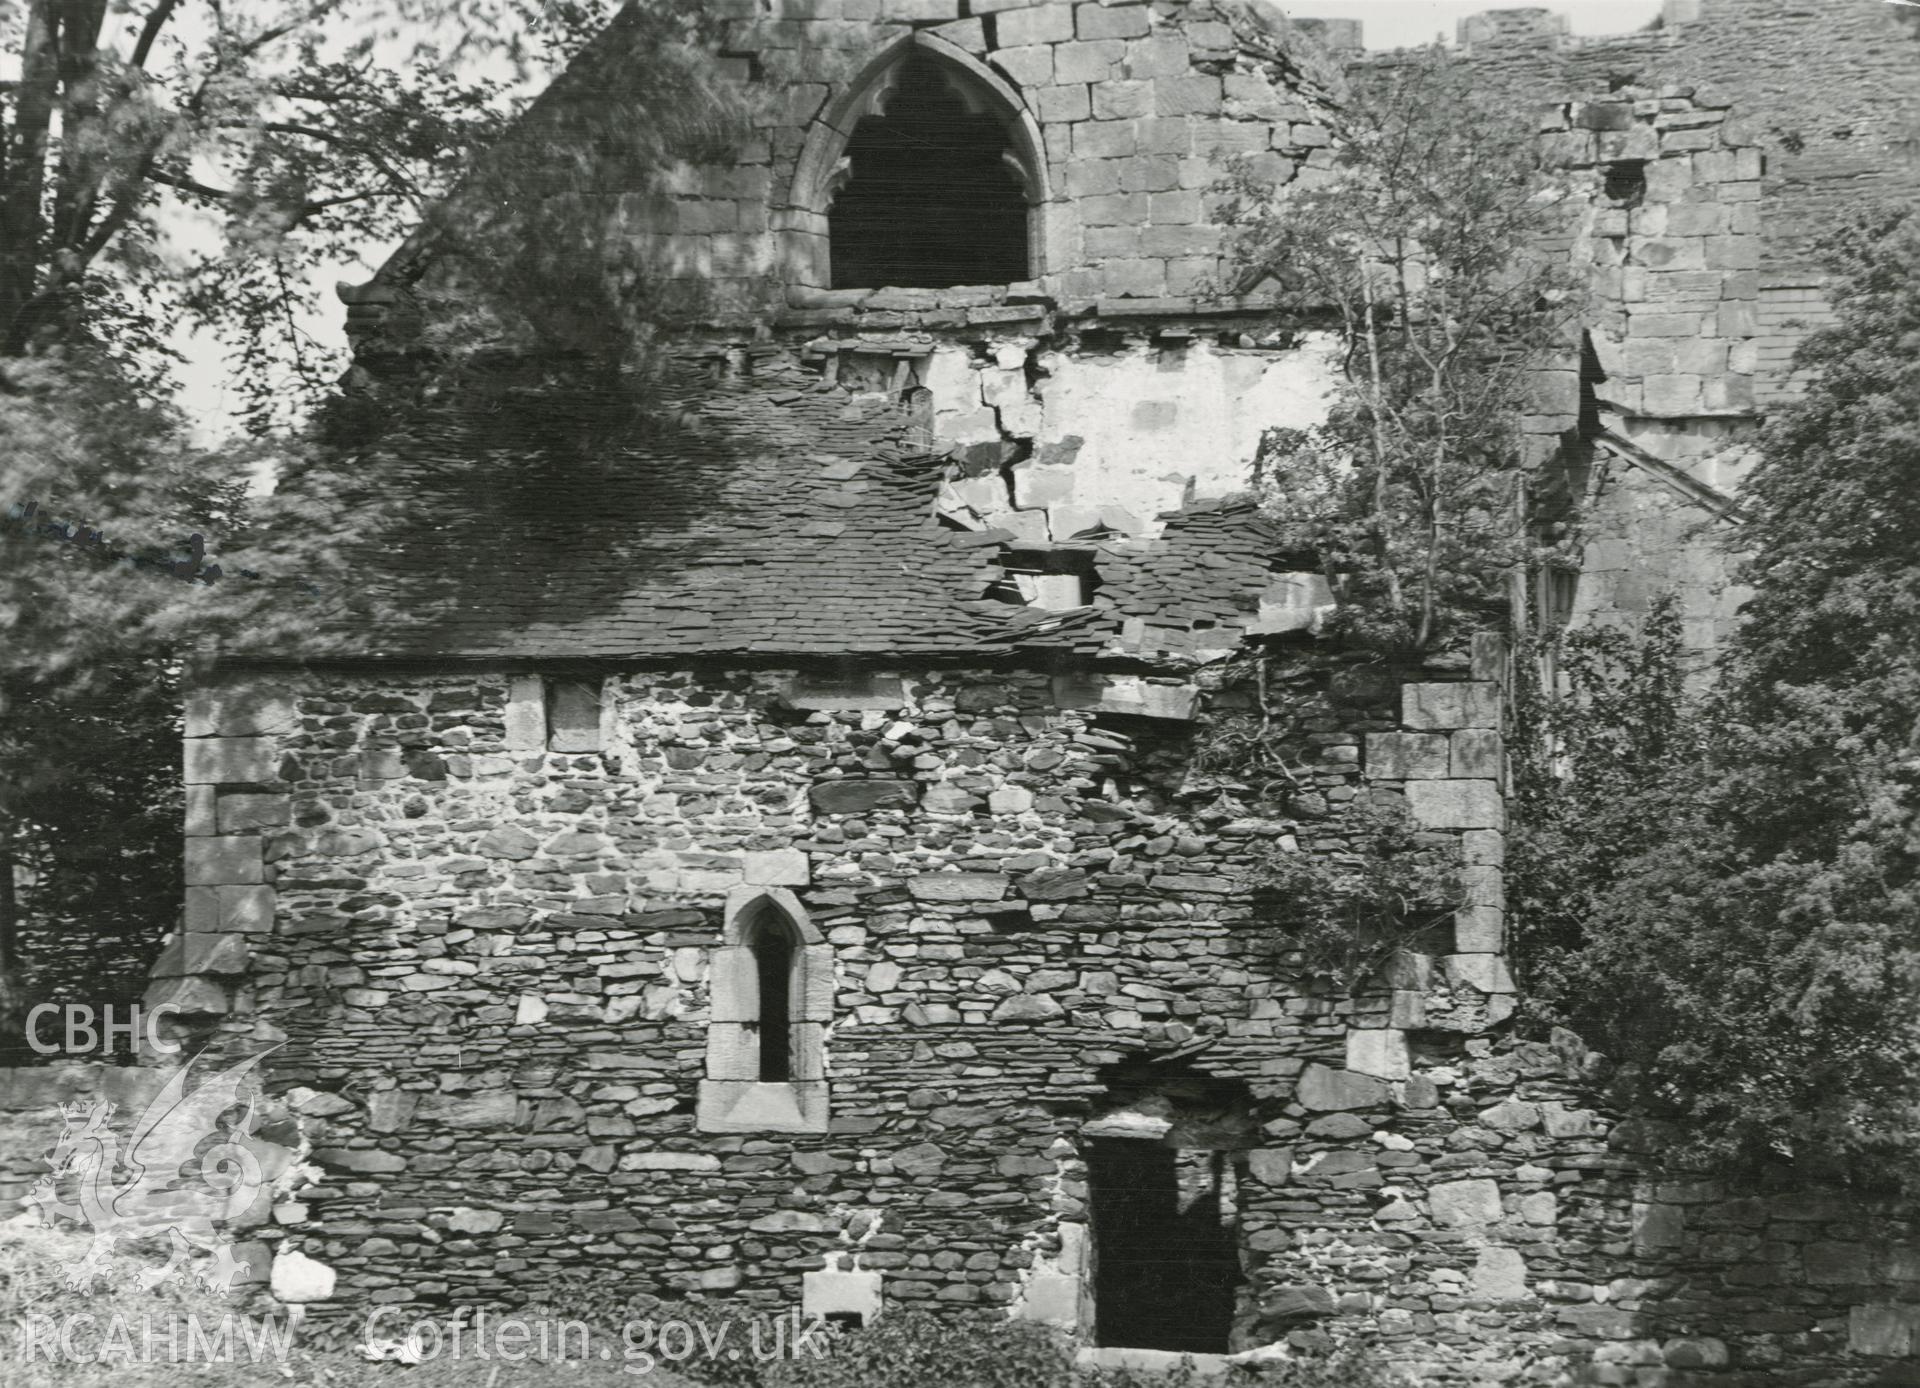 Digitised copy of a black and white photograph - close-up view of Valle Crucis Abbey showing rear from the south, taken by Shirley Jones, 1948.